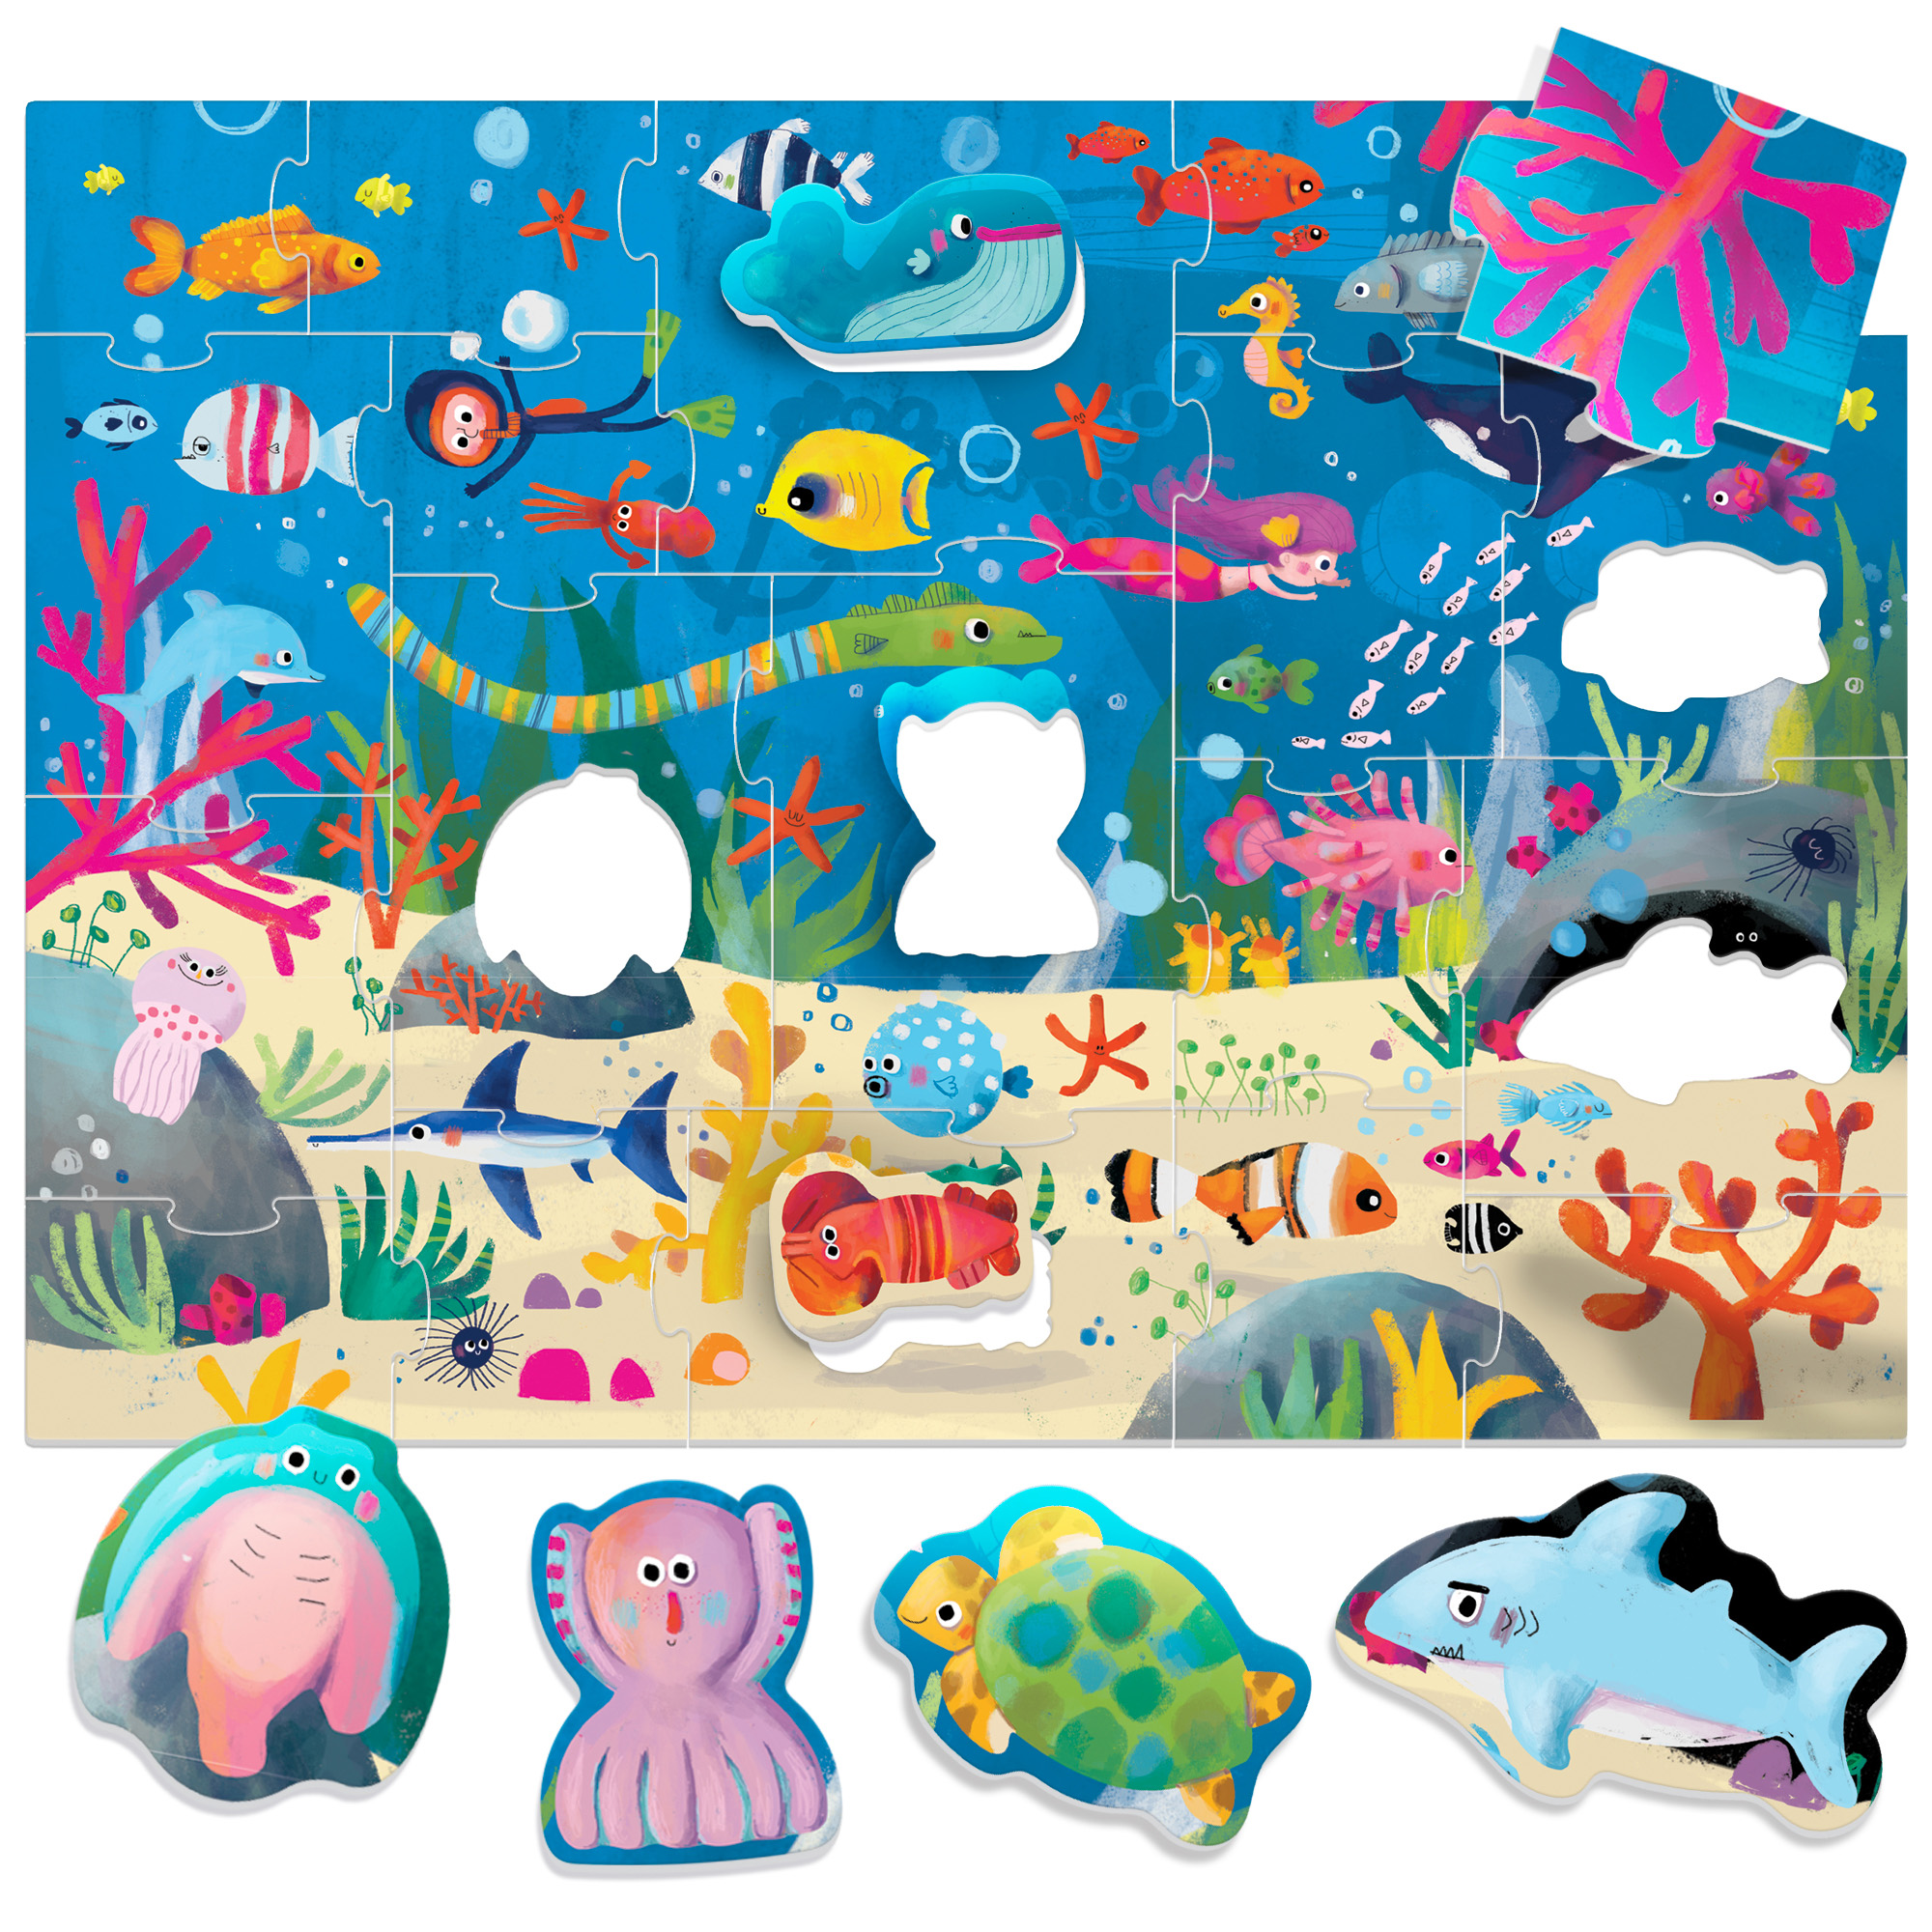 Shapes Puzzle Sea - Ecoplay